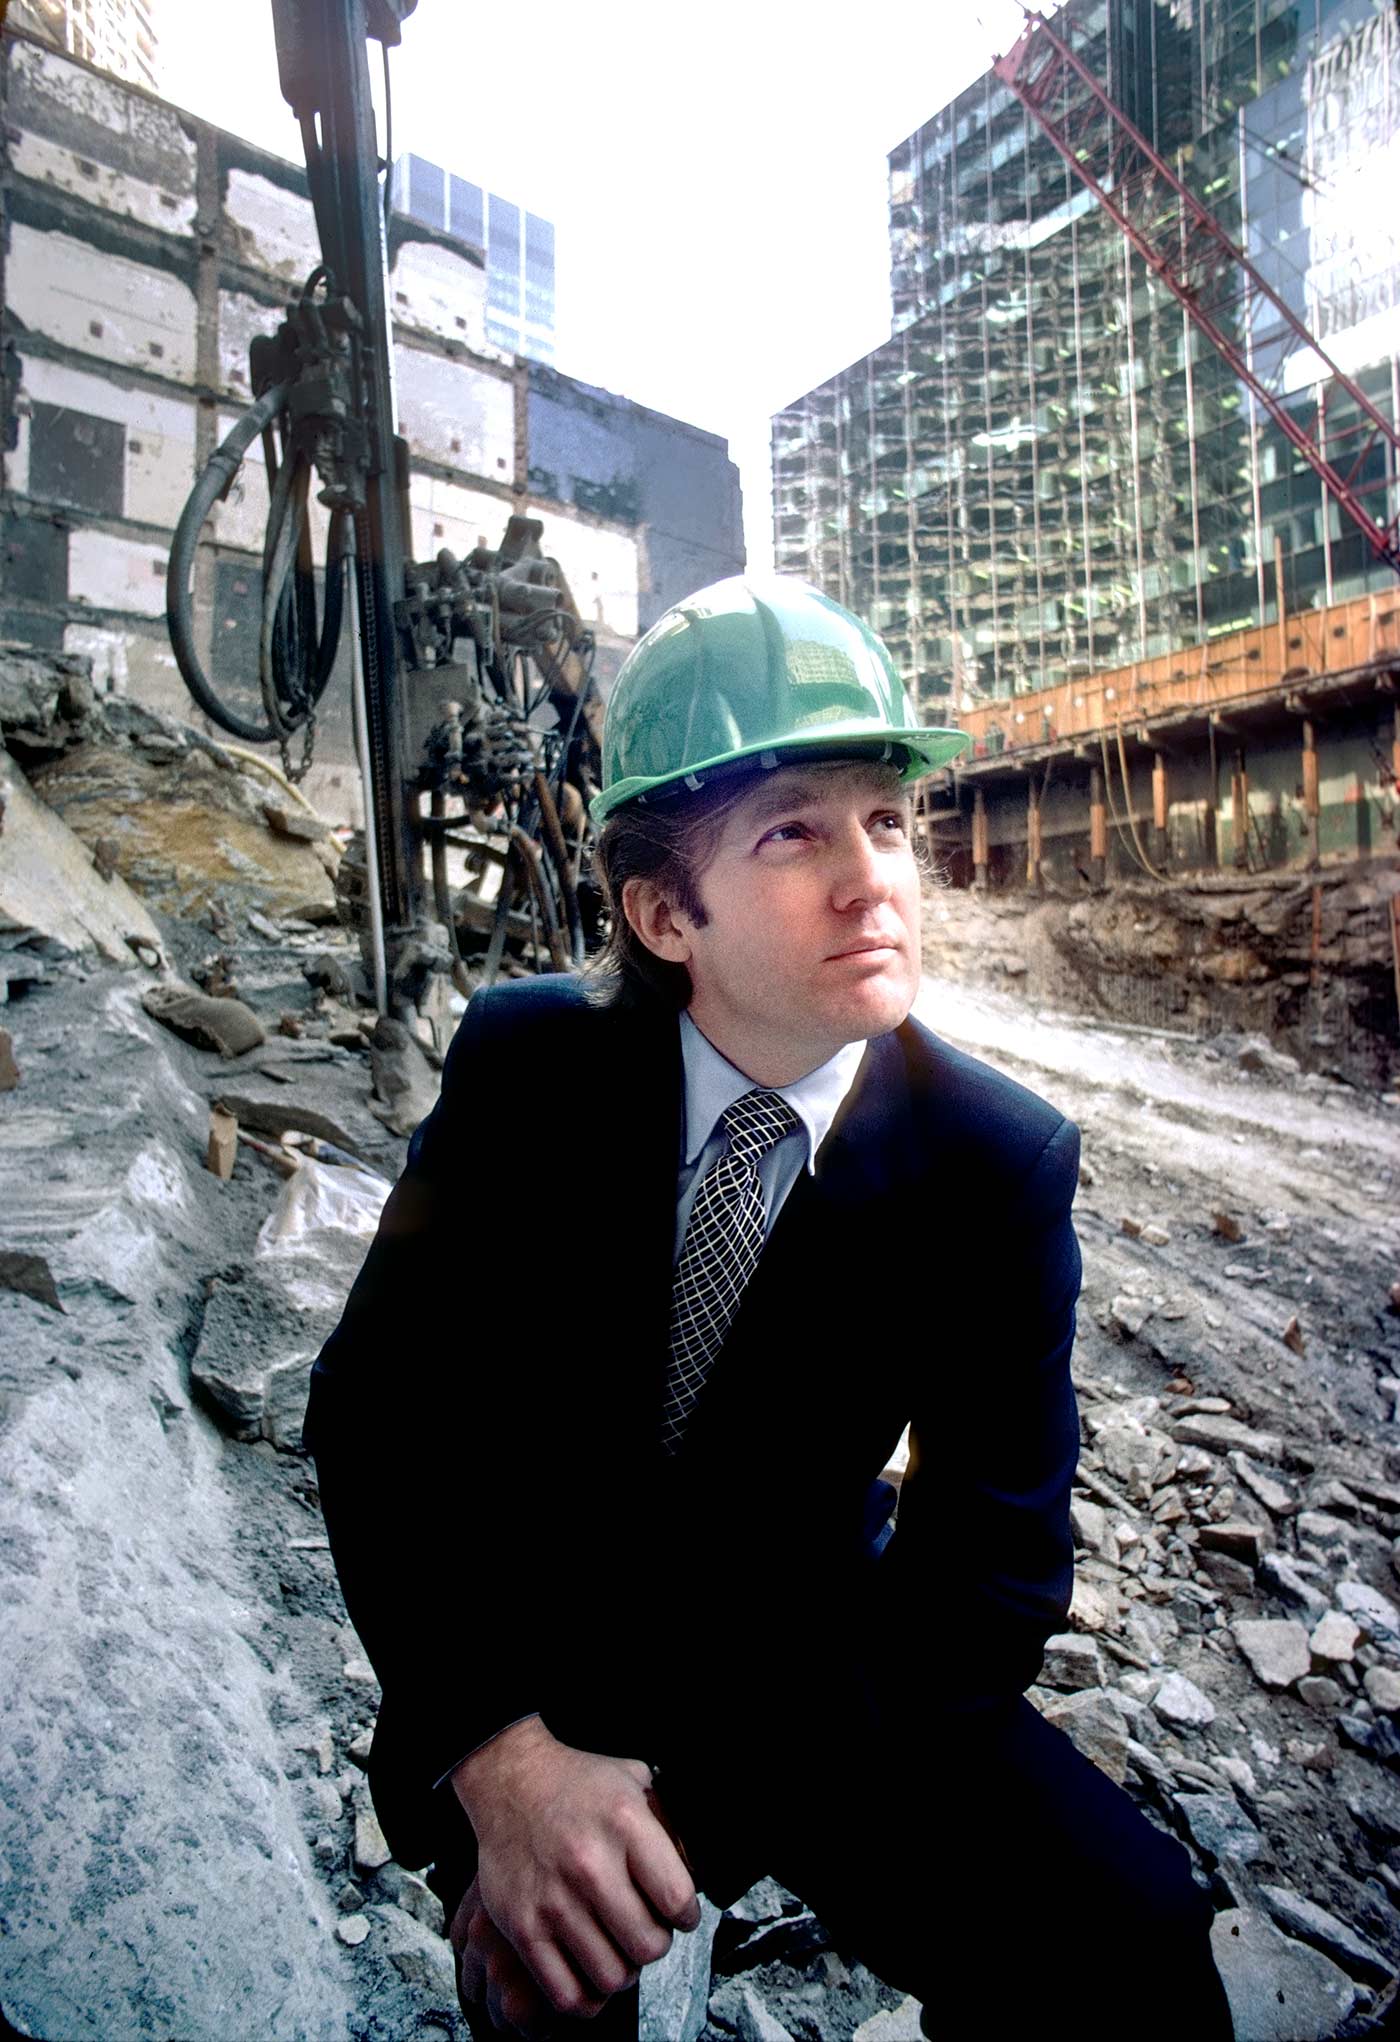 Donald Trump wearing a hardhat the Trump Tower construction site in New York in 1980